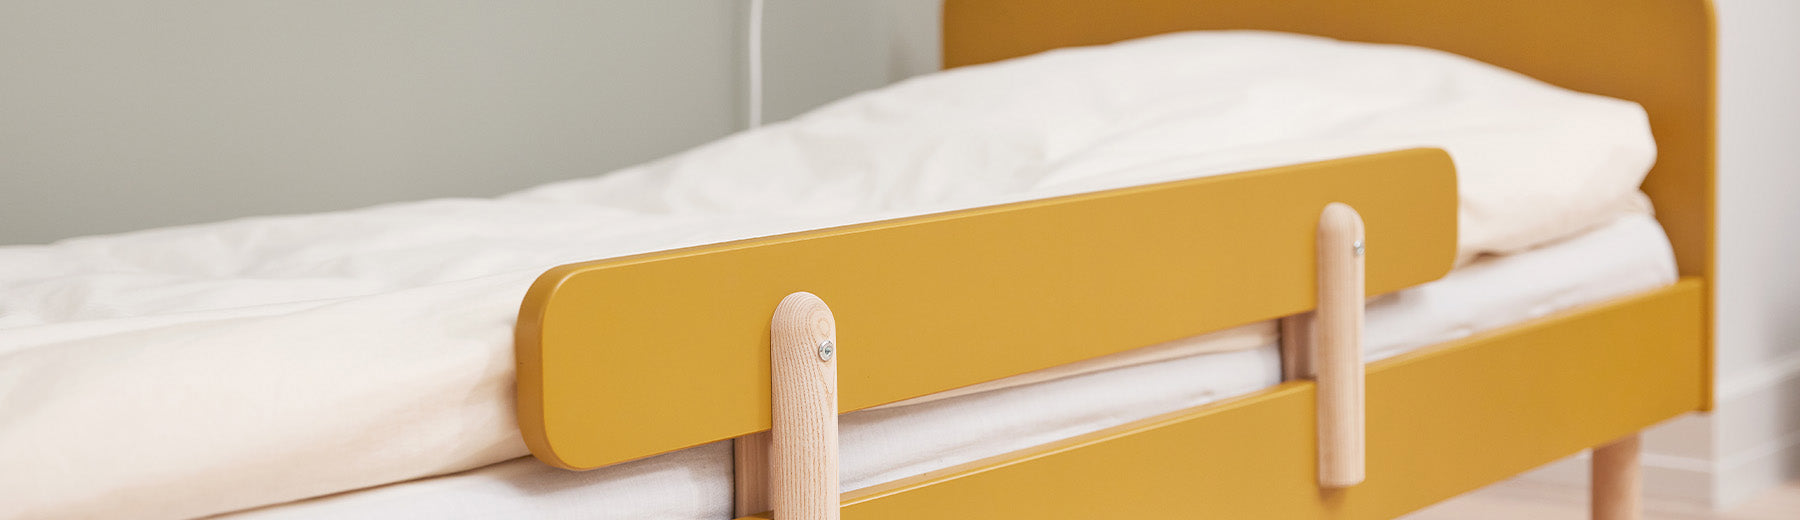 How to Build a Toddler Bed with Bed Rails - At Charlotte's House